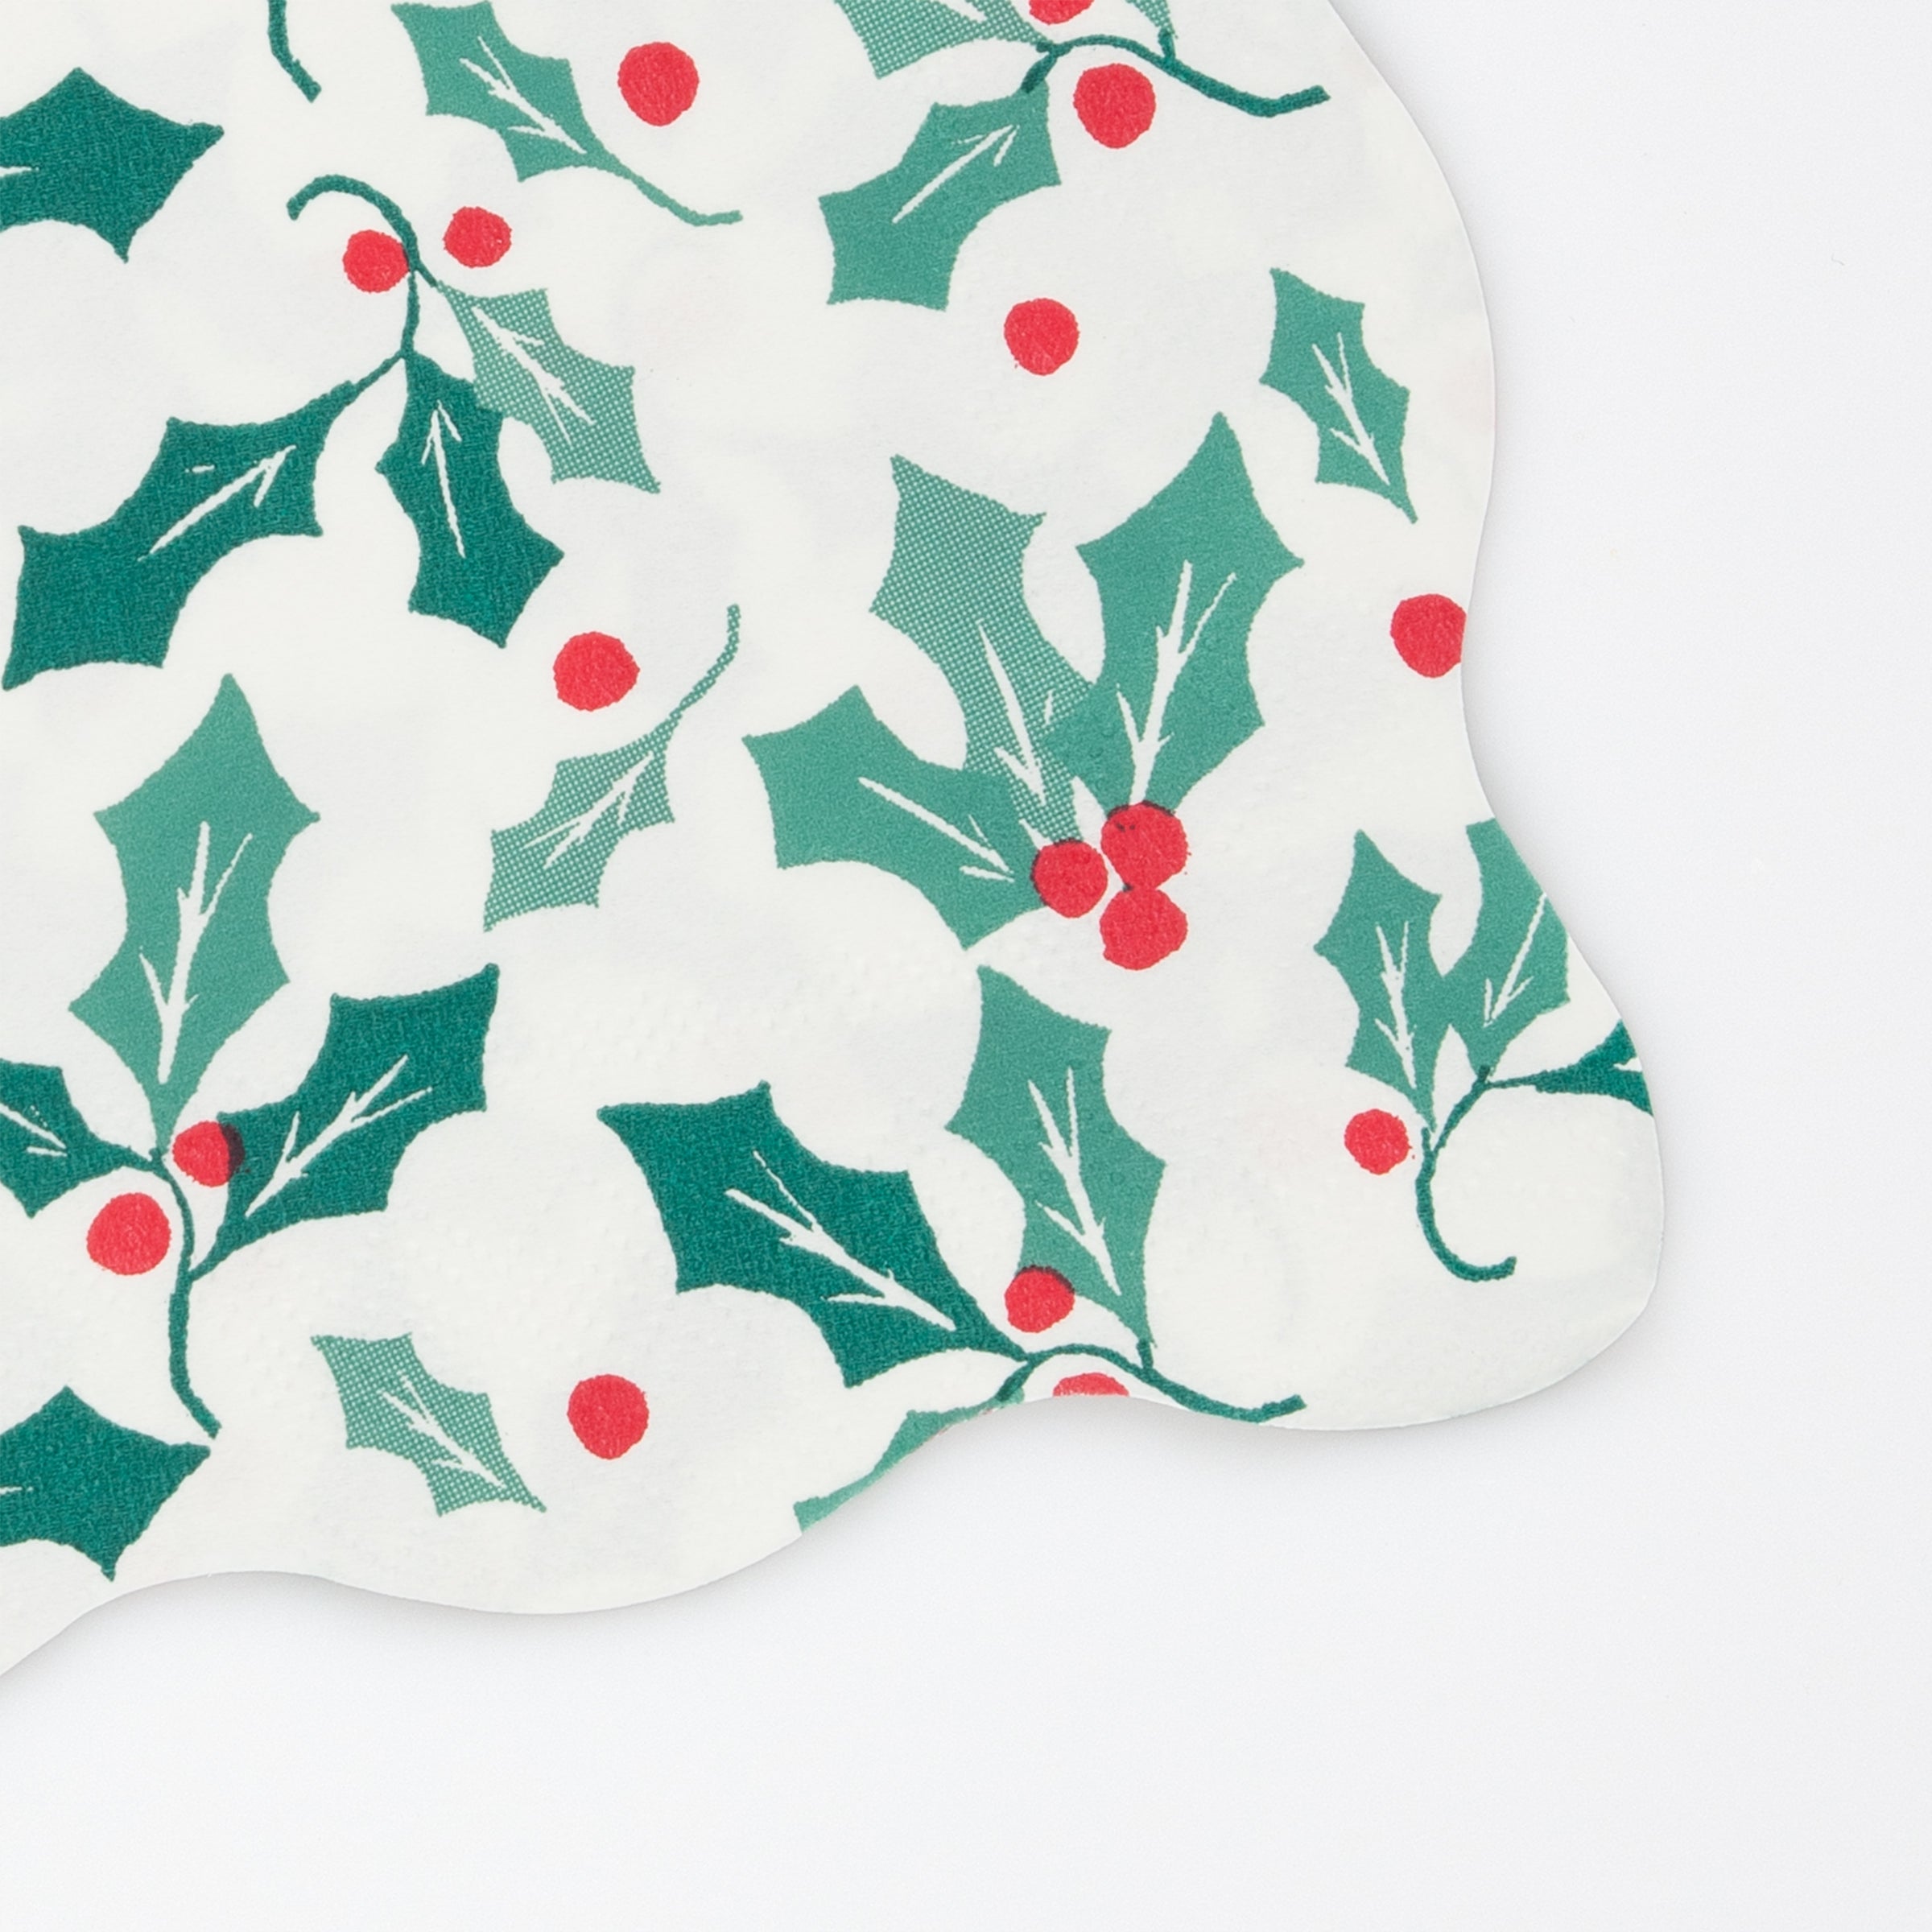 Our scalloped napkins, with a holly design, are the perfect party napkins to add to your Christmas party supplies.